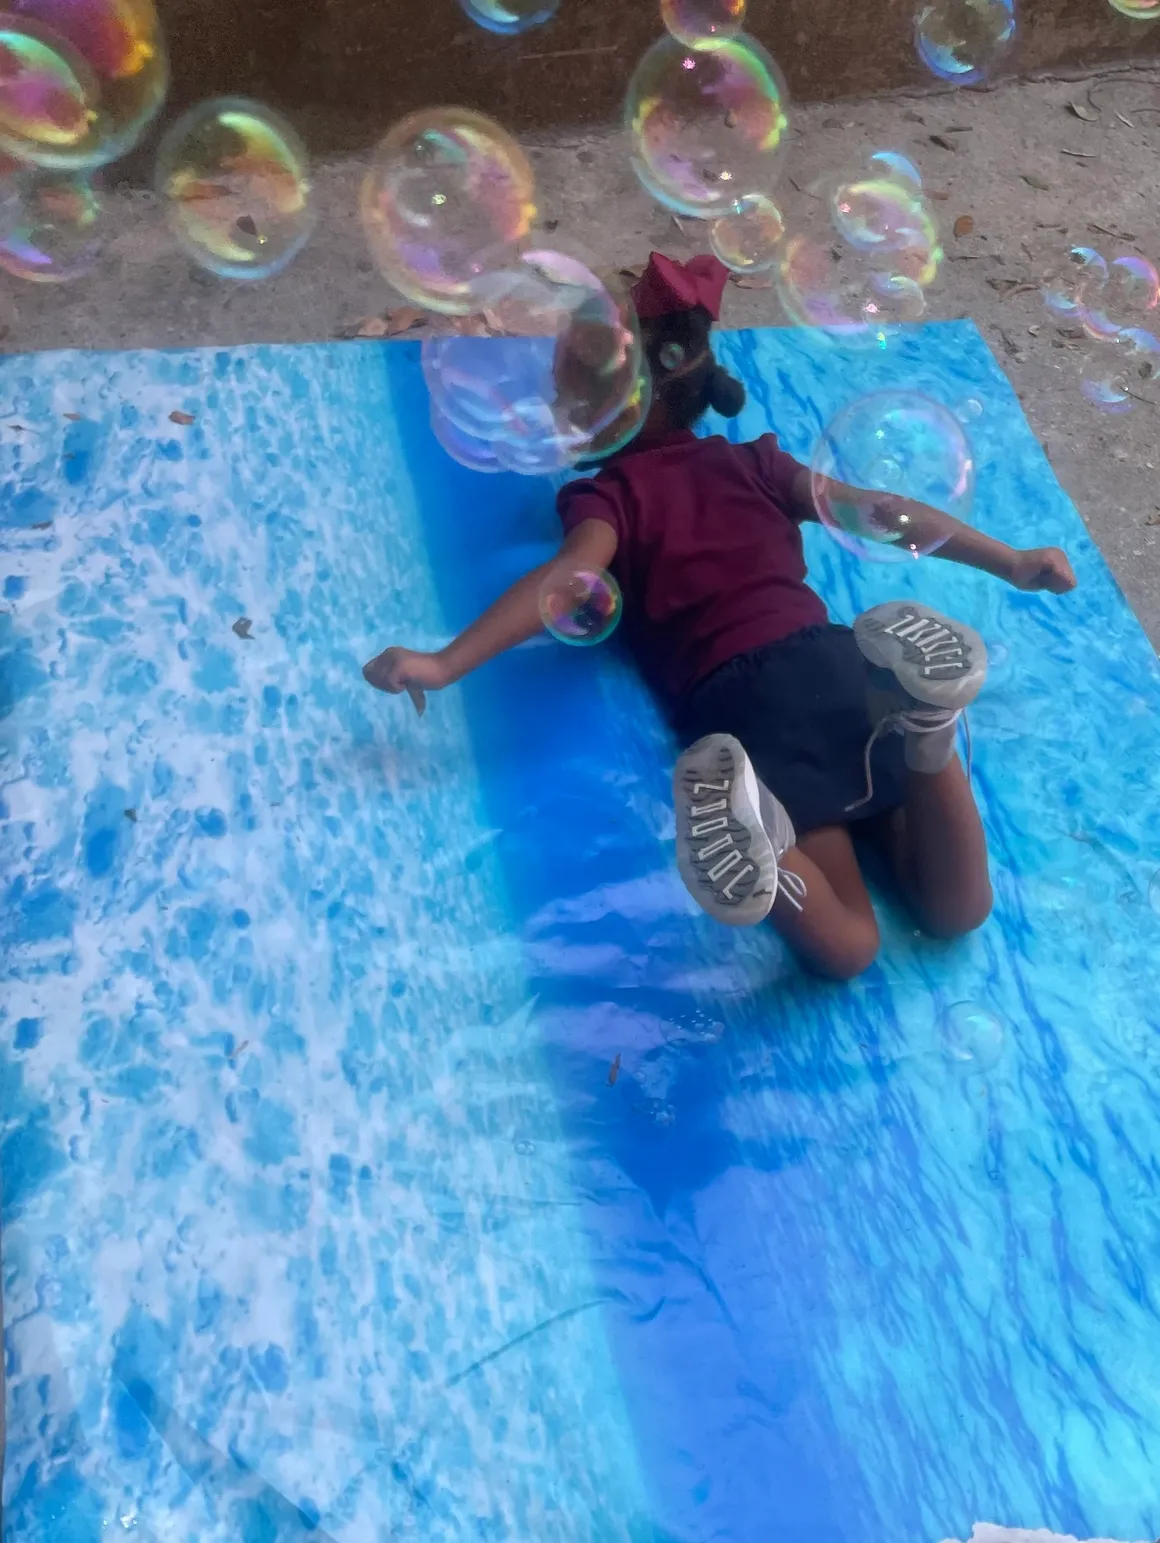 A person on a skateboard in the water.